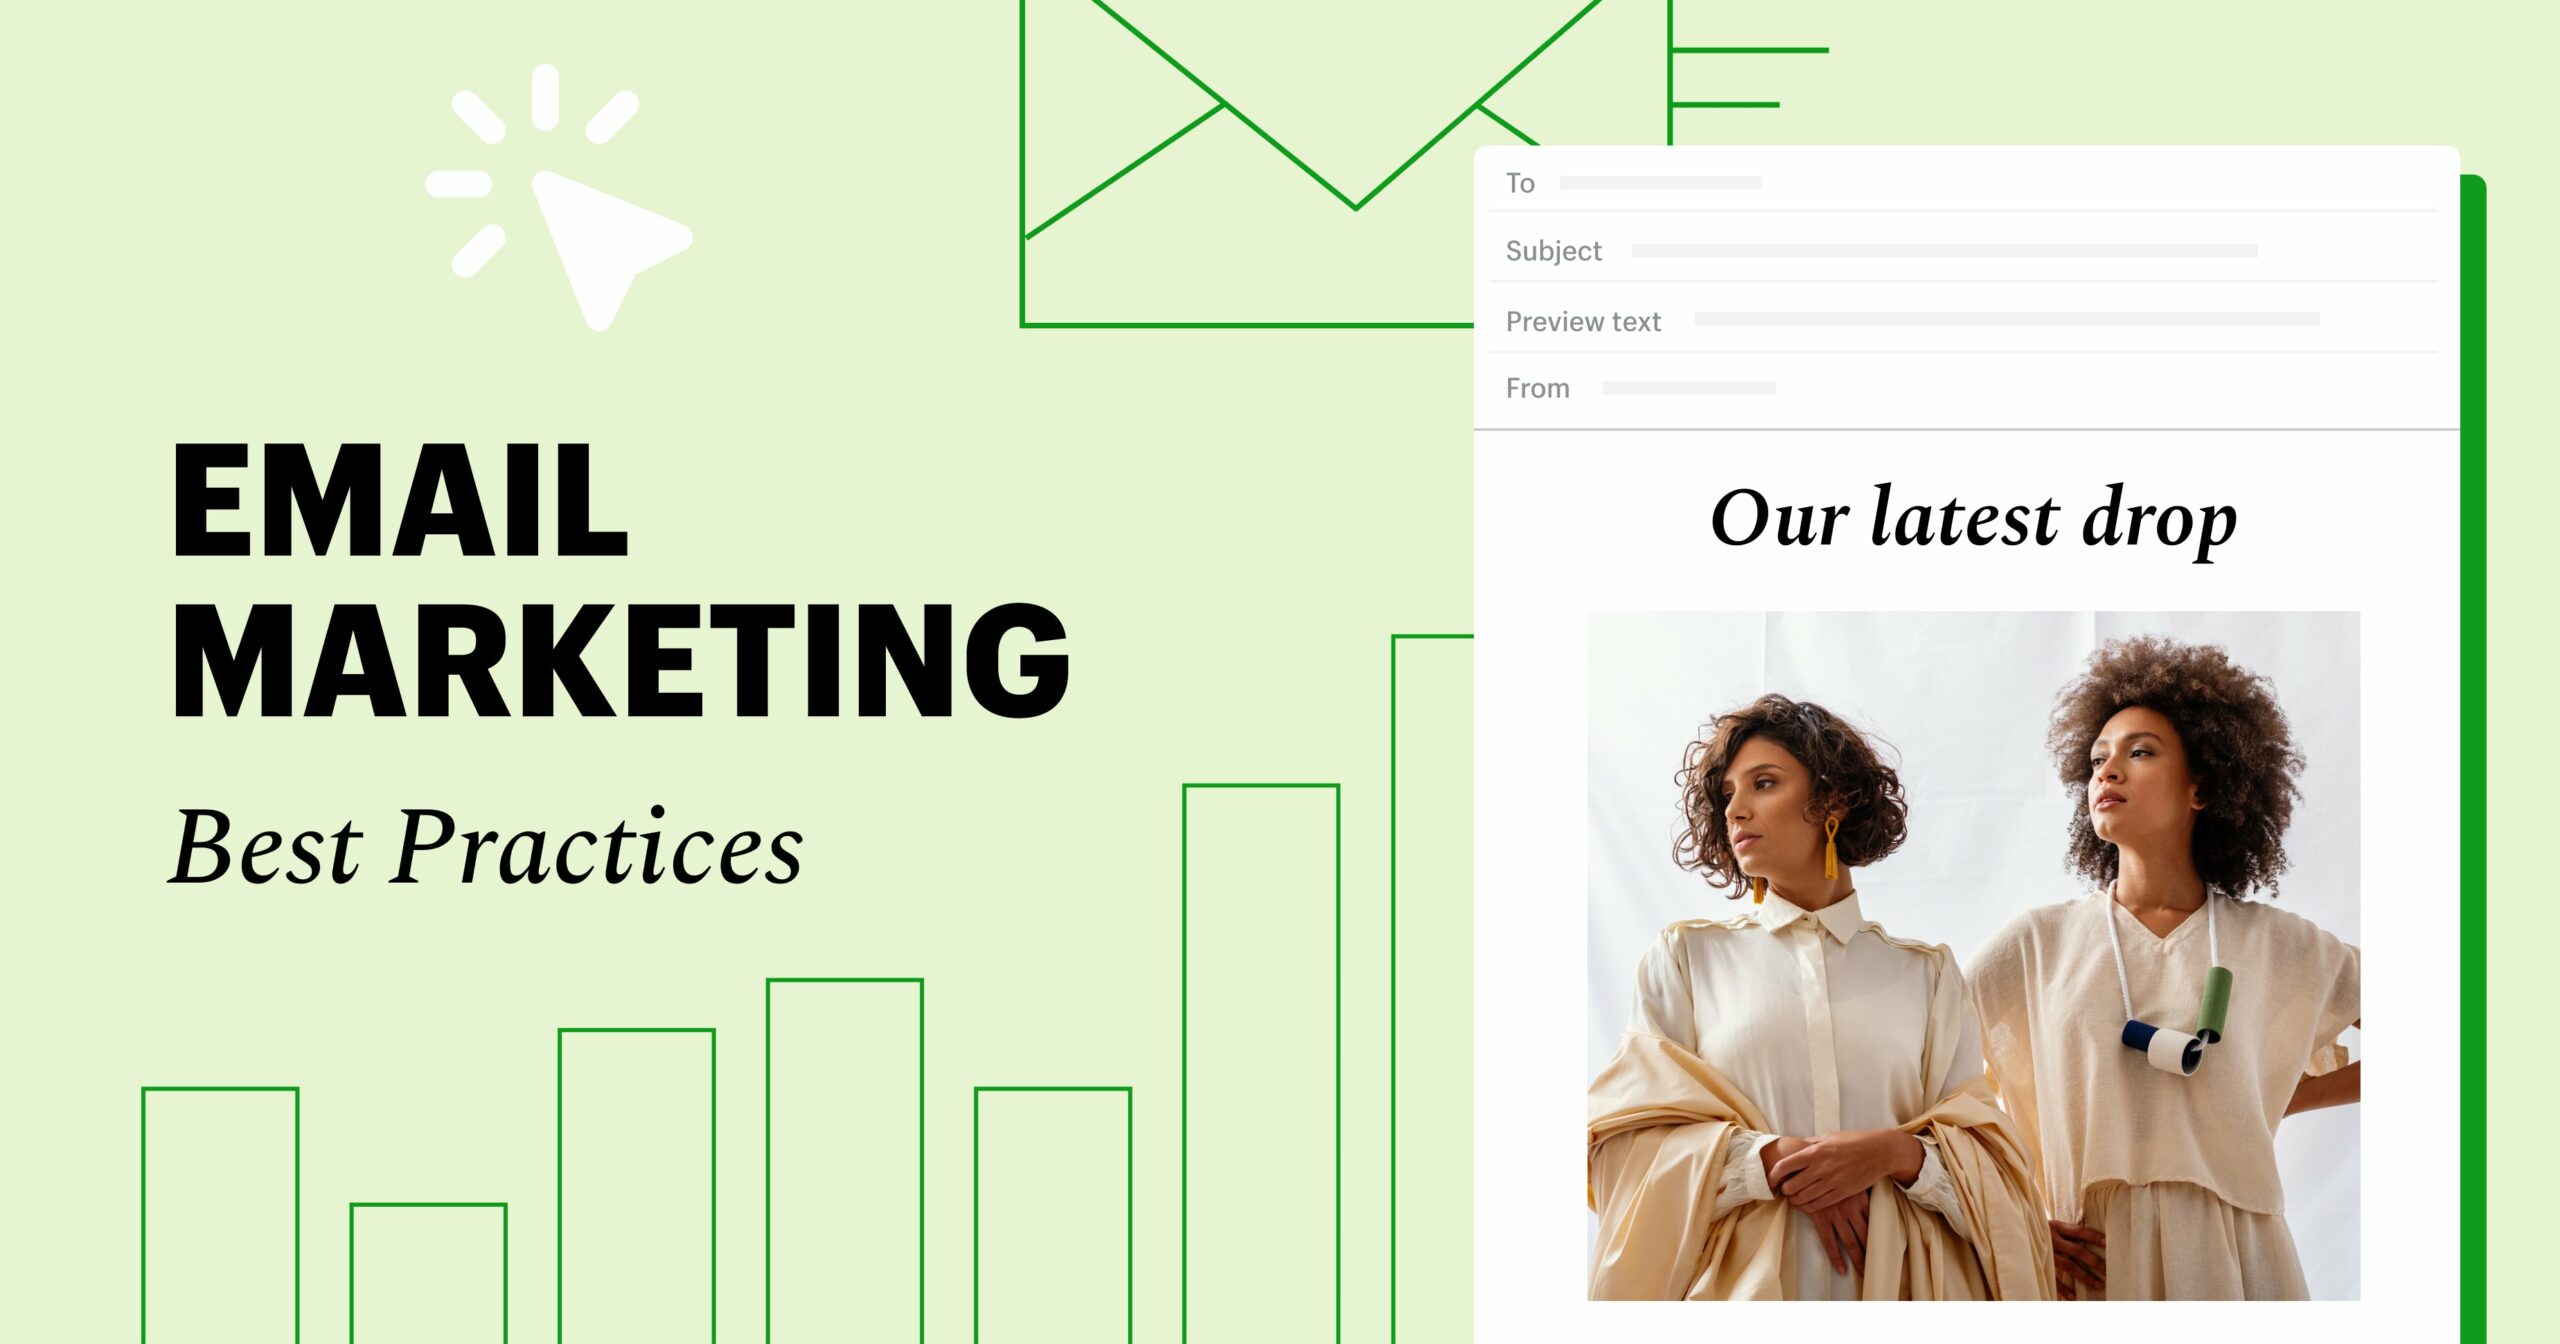 An image of a mocked up email features two women next to the text, email marketing best practices